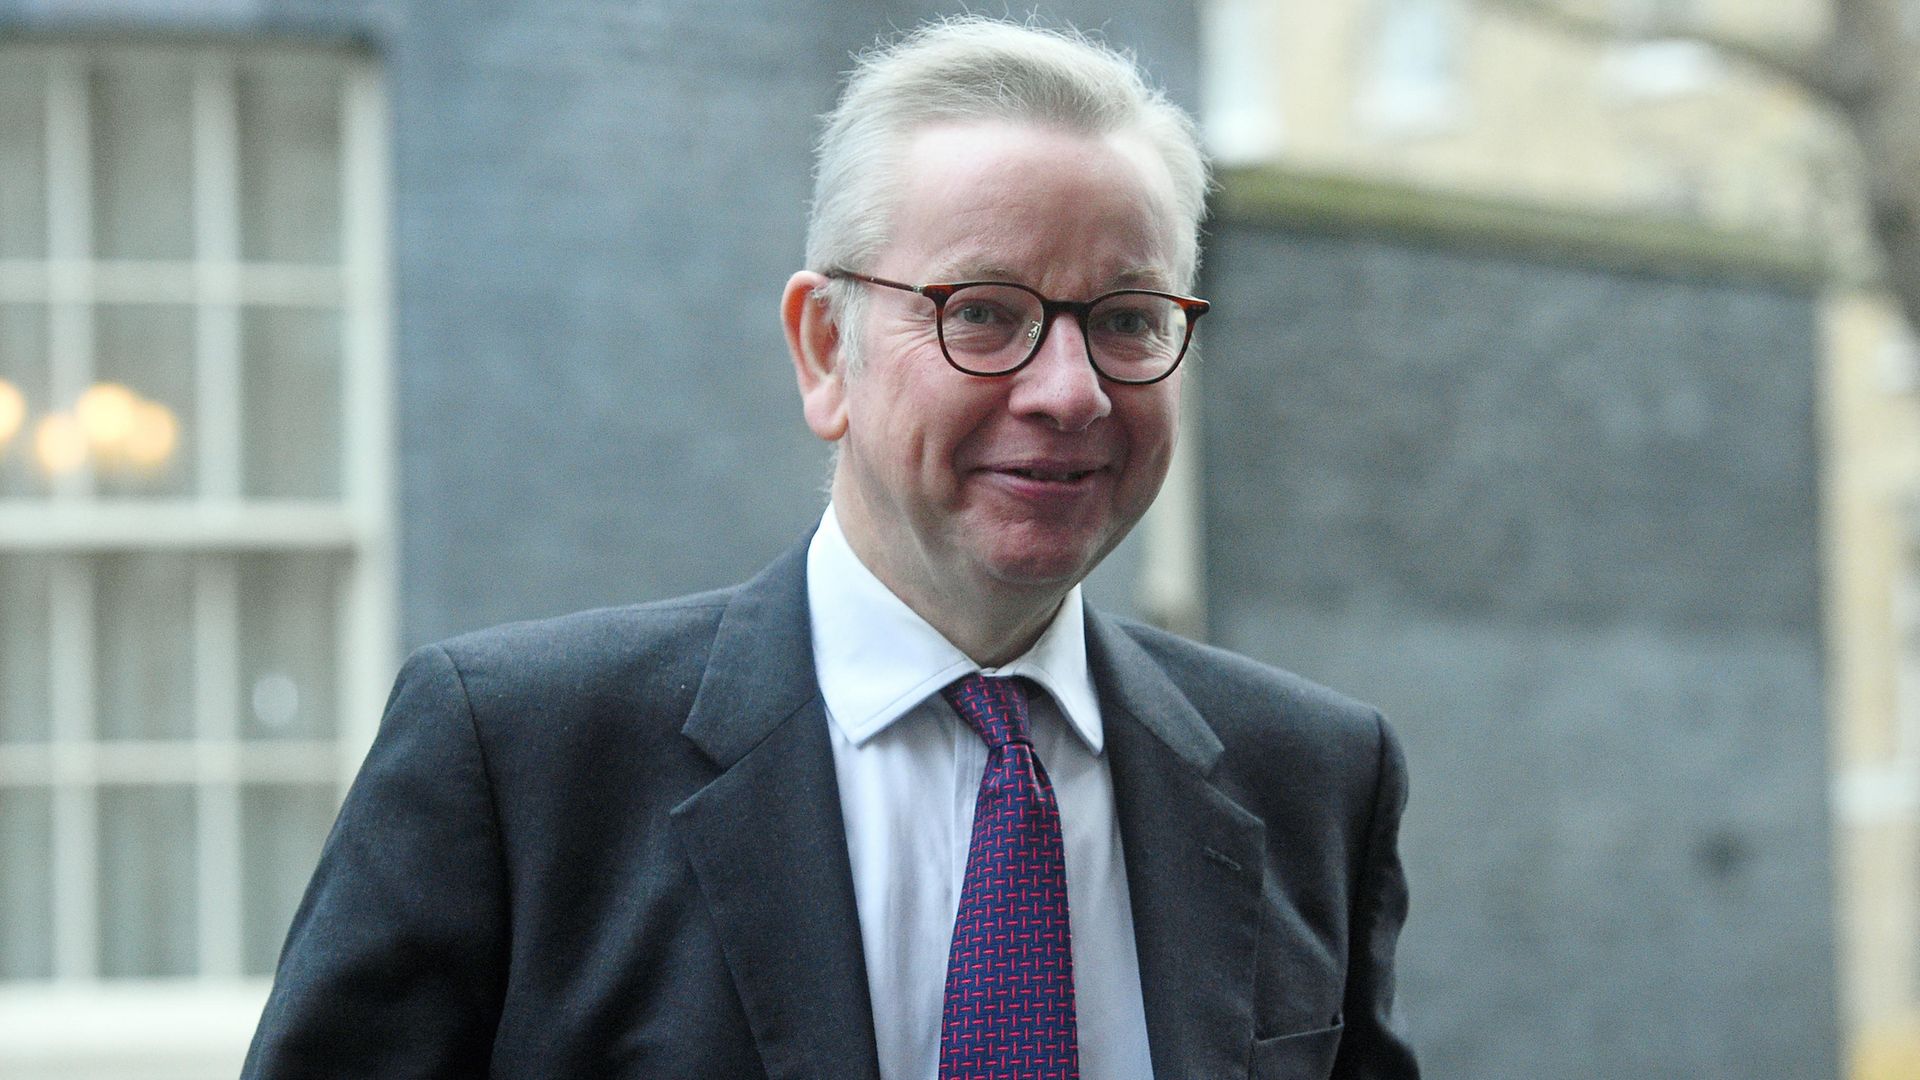 Michael Gove, minister for the Cabinet Office and Chancellor of the Duchy of Lancaster, arrives in Downing Street, London - Credit: PA